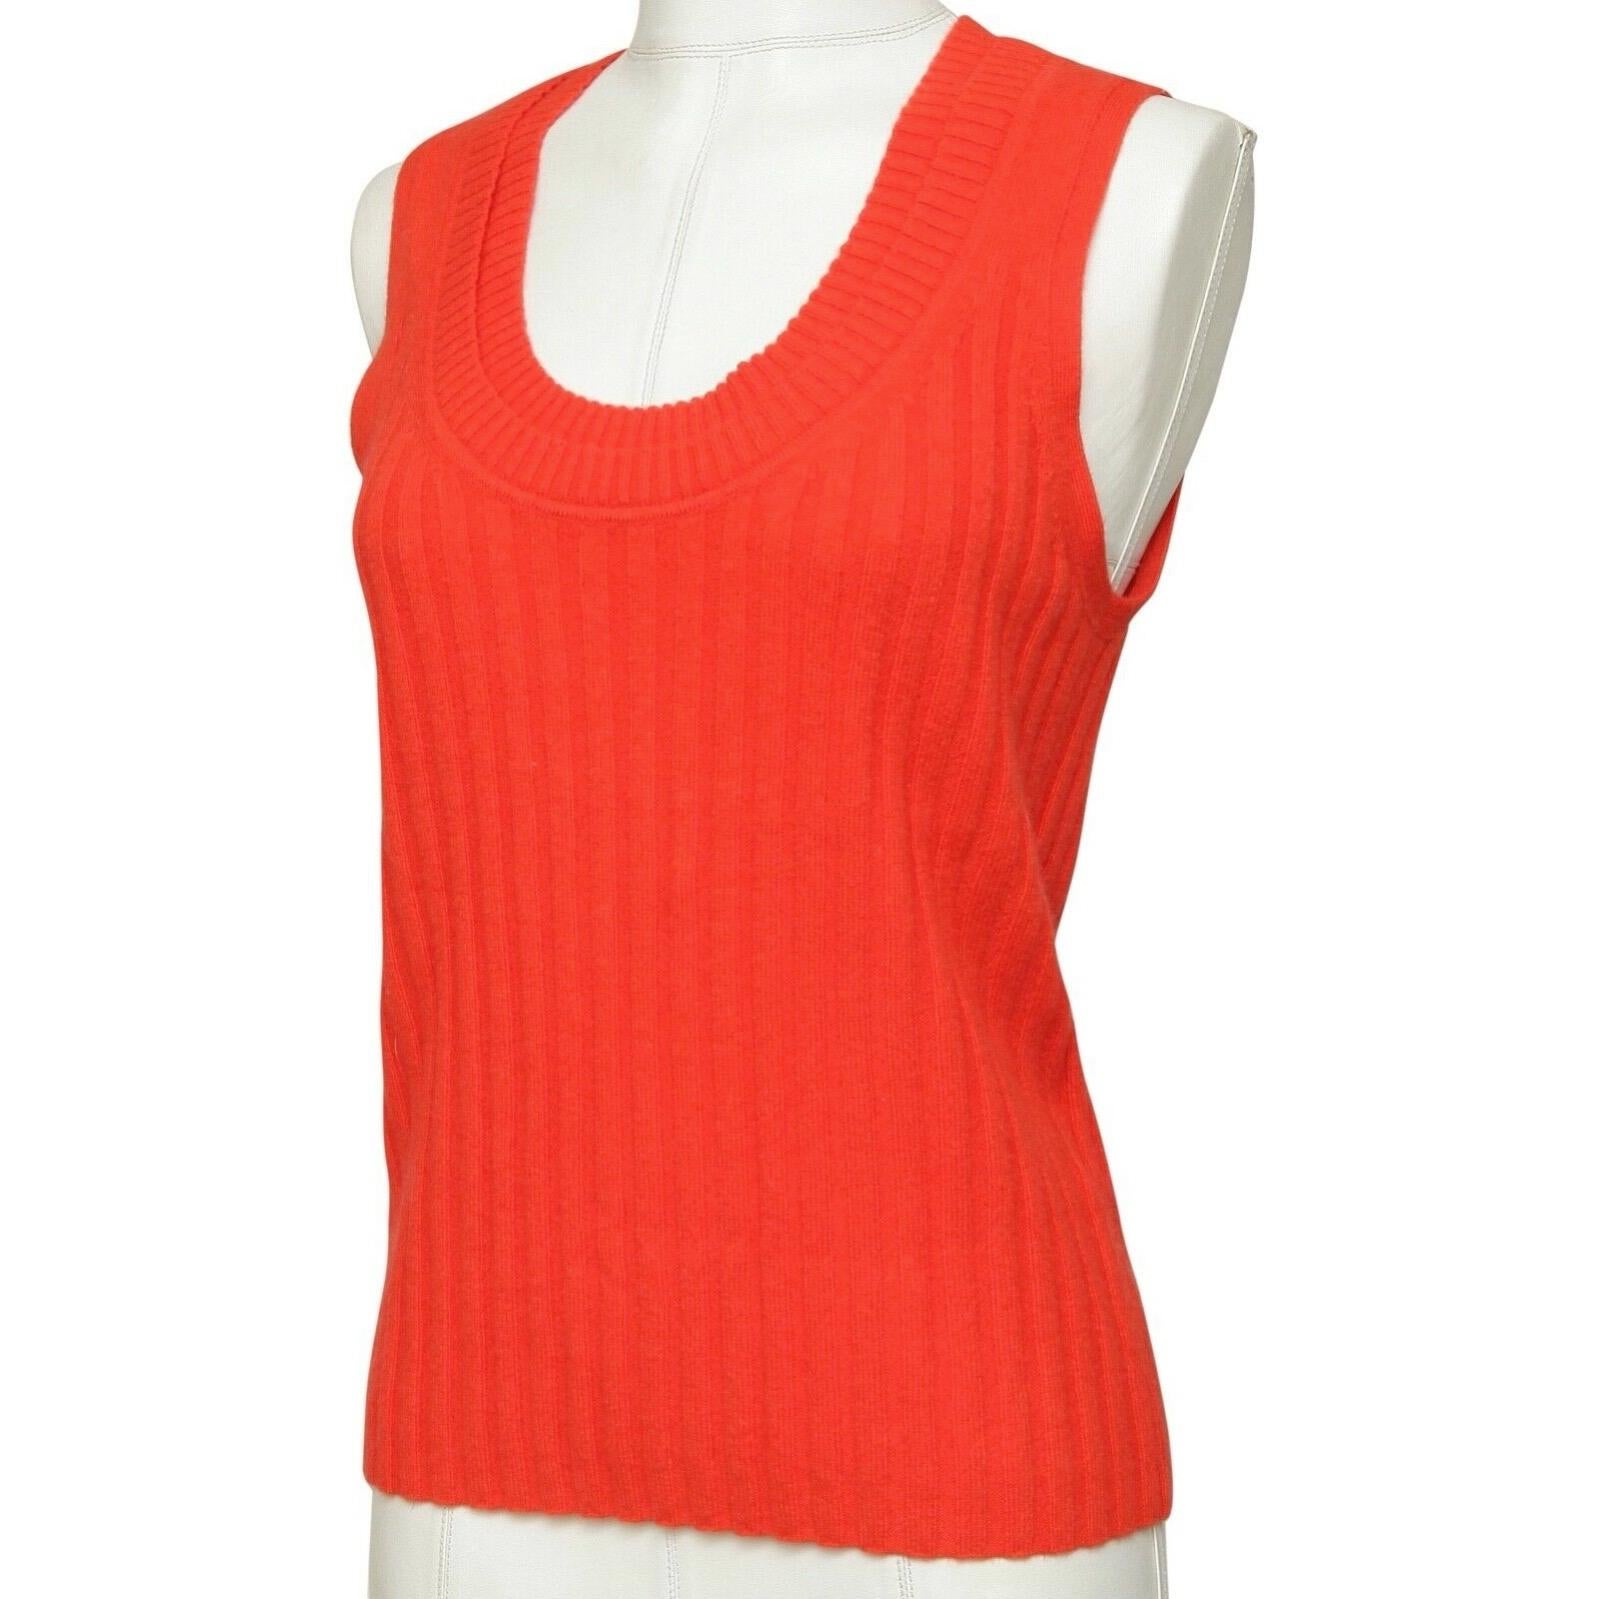 Red 3.1 PHILLIP LIM Orange Sweater Knit Sleeveless Scoop Neck Ribbed Cashmere L NWT For Sale